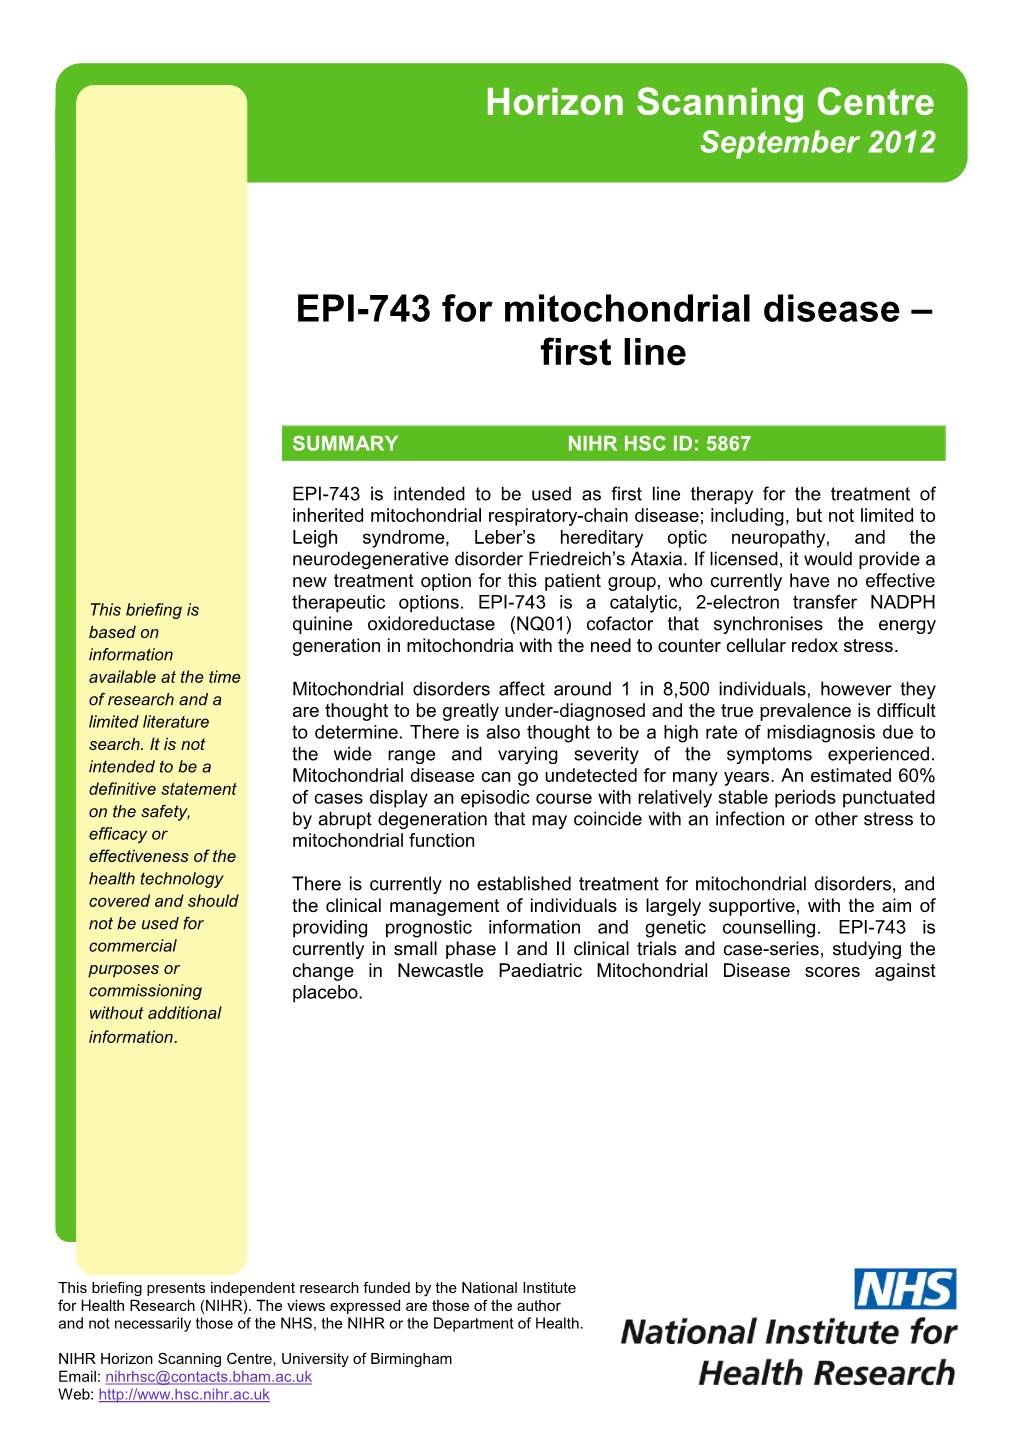 EPI-743 for Mitochondrial Disease – First Line